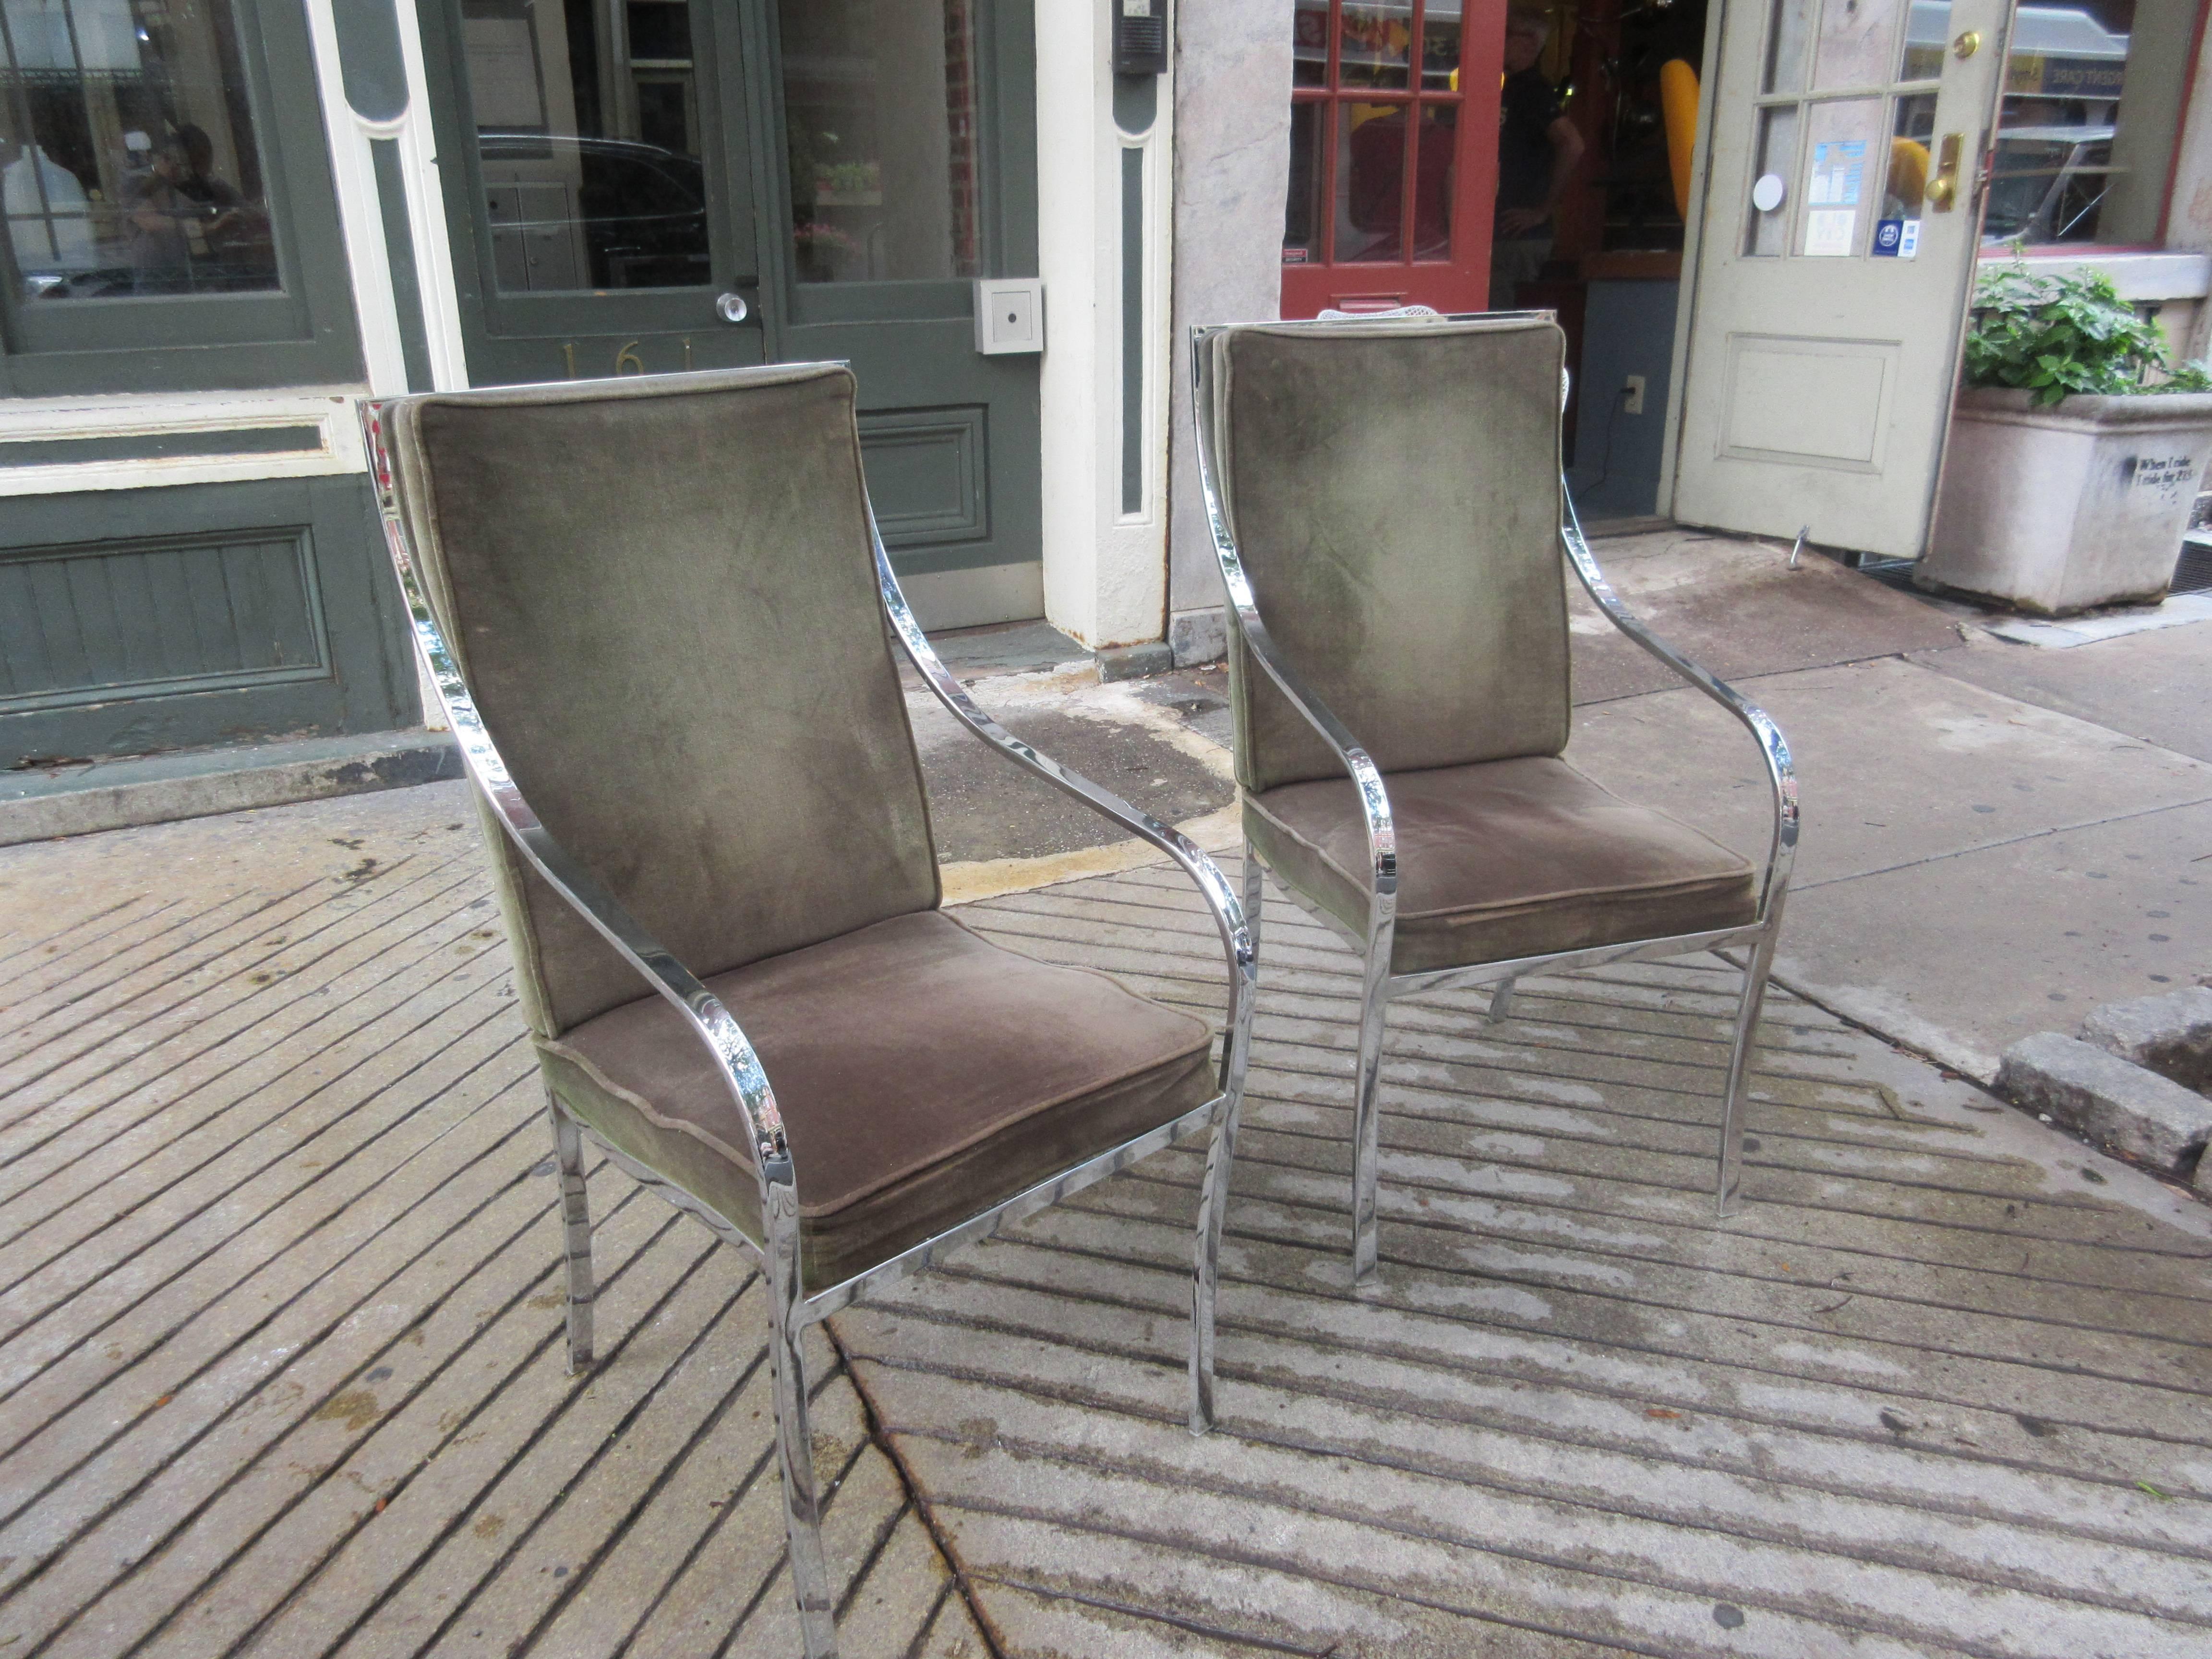 Very dramatic set of Baughman armchairs with swooping chrome arms that flow from the backs of the chairs. Original in every way right down to their Thayer Coggin labels! Fabric shows their age but still usable if desired! Would consider selling in